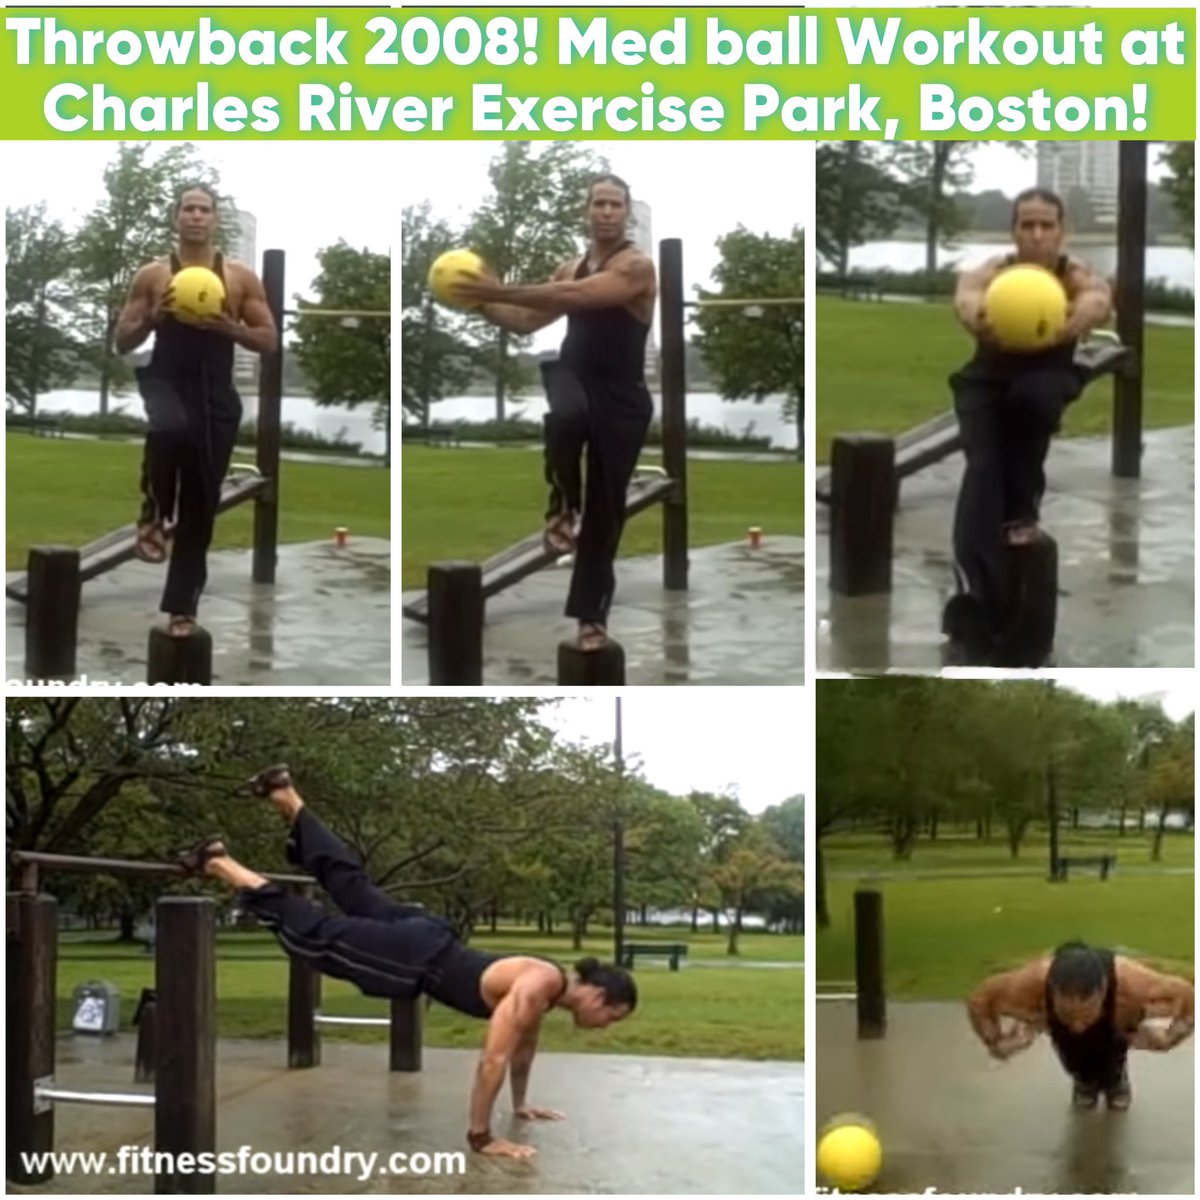 ⏰Throwback Thursday to 2008! 🏐Med ball workout at the Charles River Exercise Park in Kenmore Sq., Boston. ✅ Looks like some things never change - my love for the outdoors and getting active! 🌳💪🏾 #TBT #FitnessJourney #boston #outdoors #nature #exercise #fun #health #life